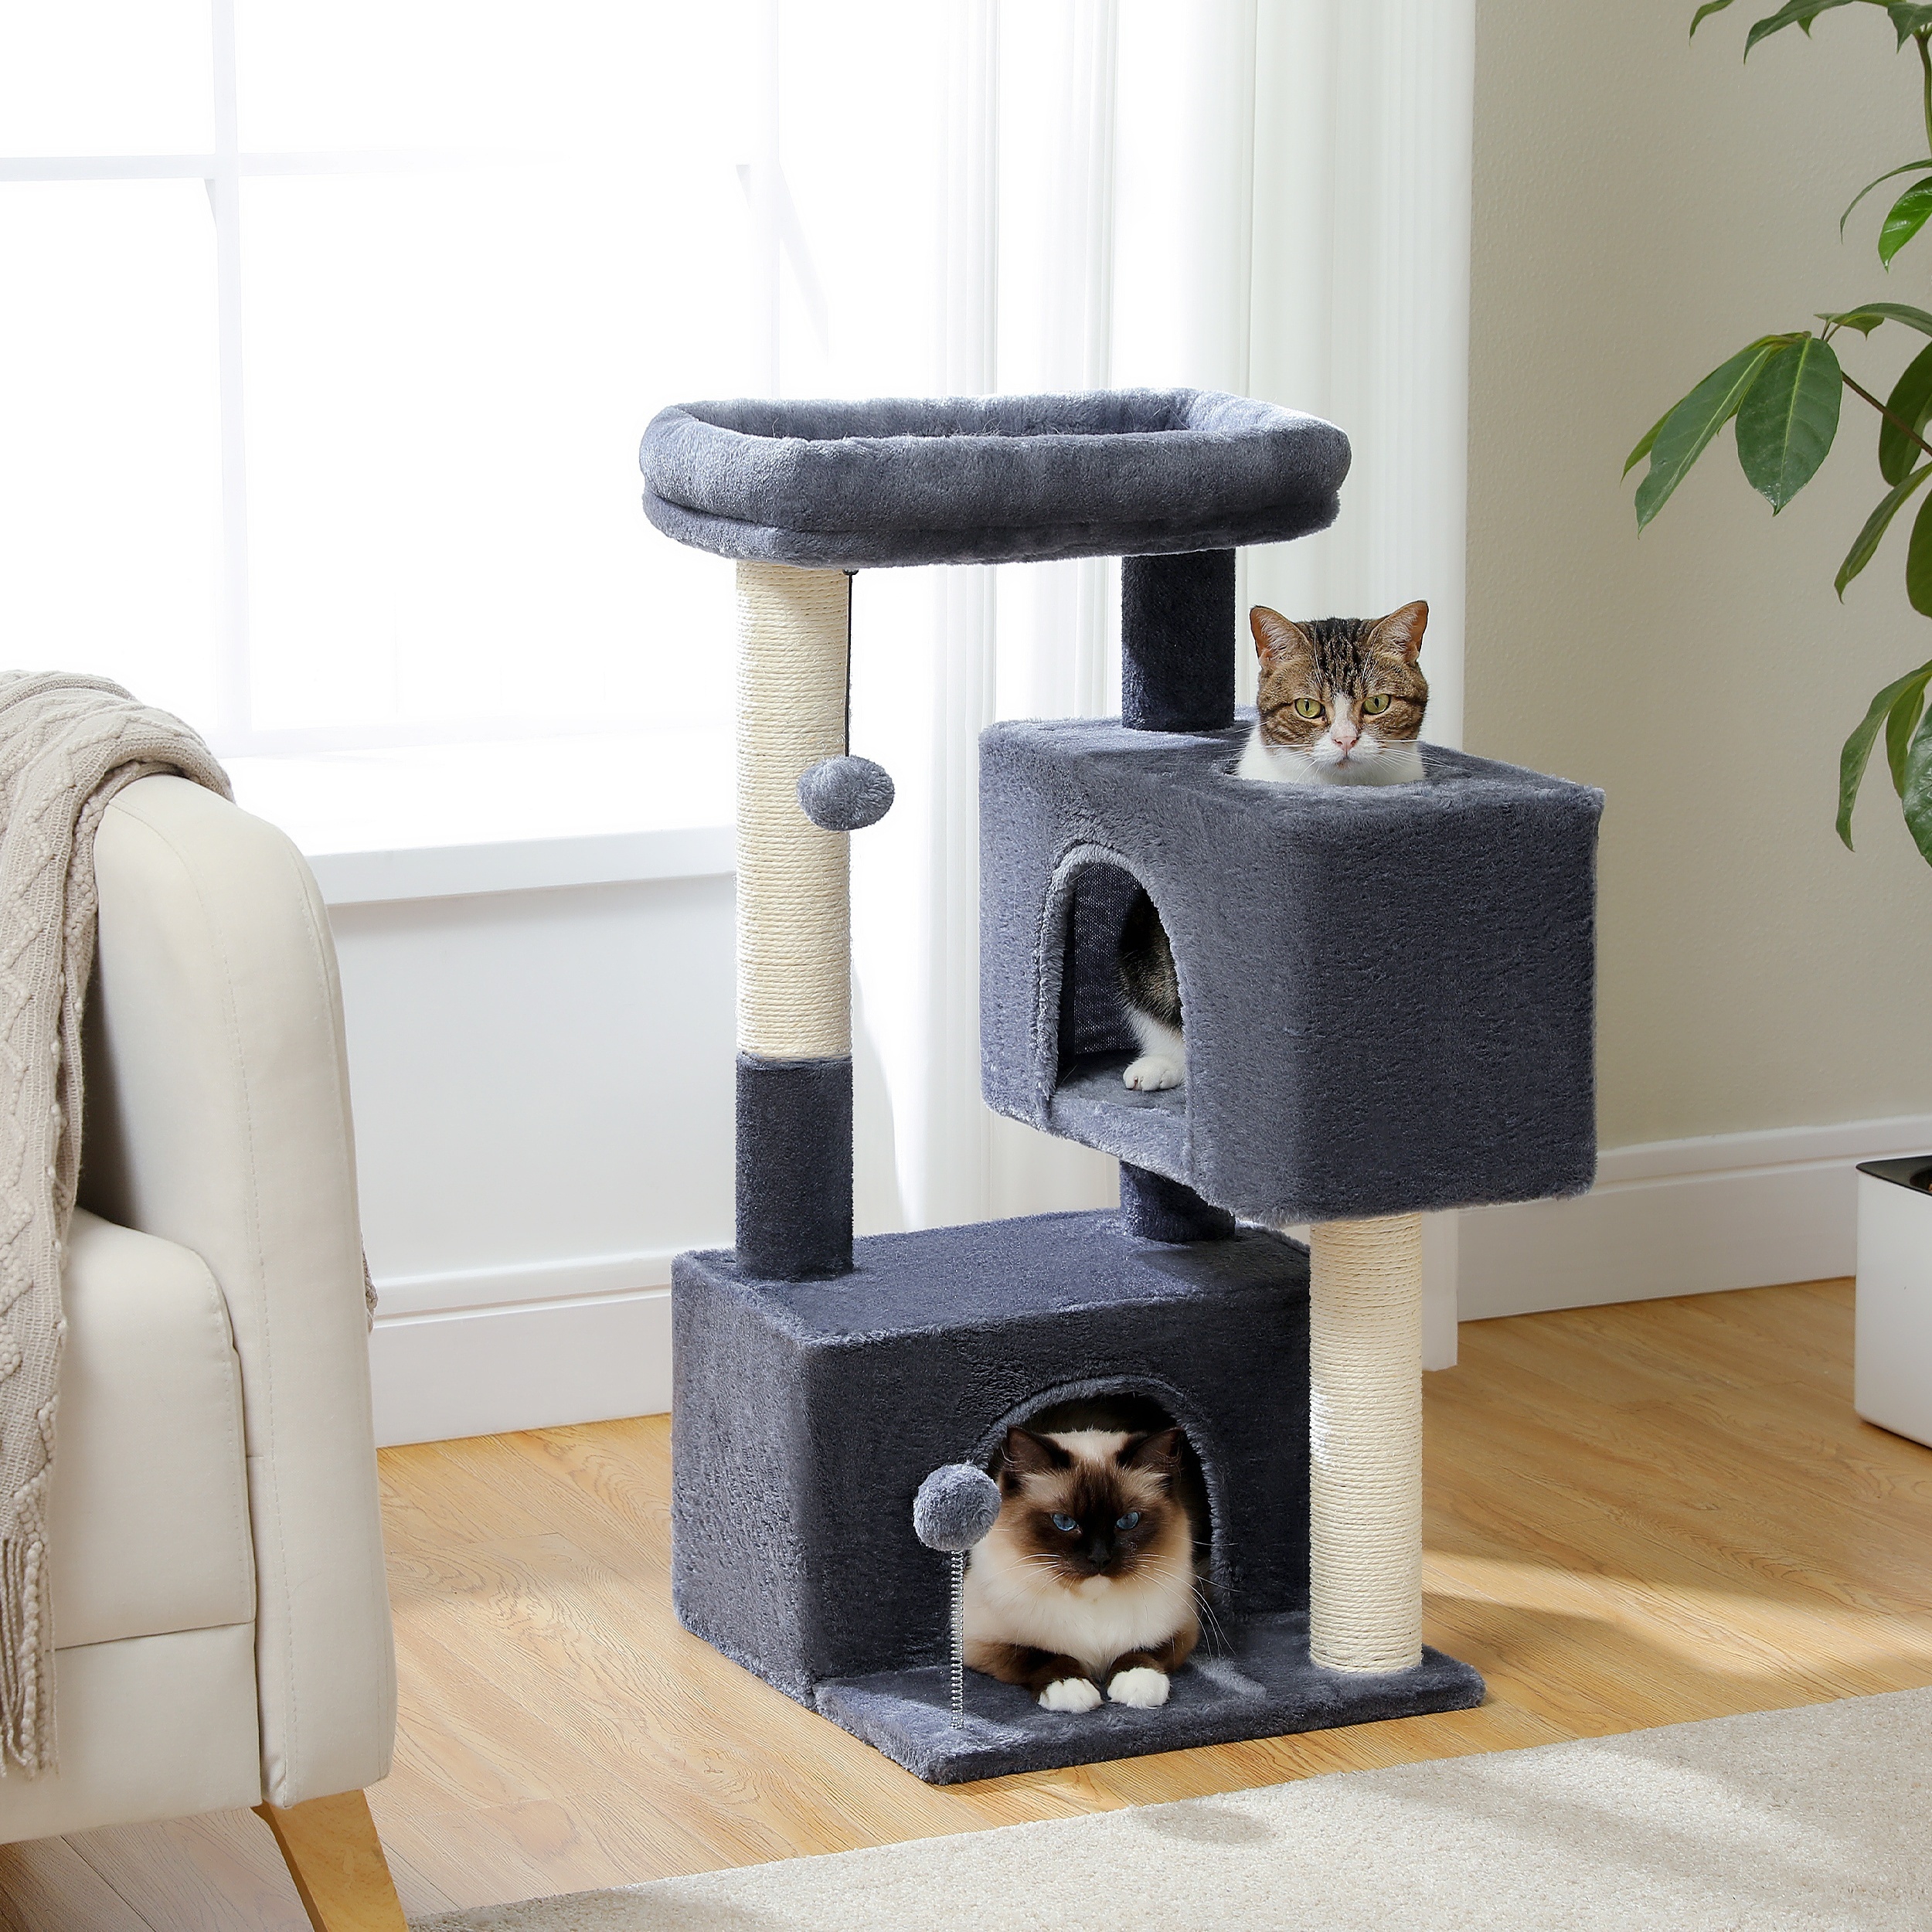 

Pawzroad 31.5" Cat Tree Cat Tower With Dual Large Condos For Kittens And Medium Size Cats, 3 Colors, Grey, Beige, Dark Grey